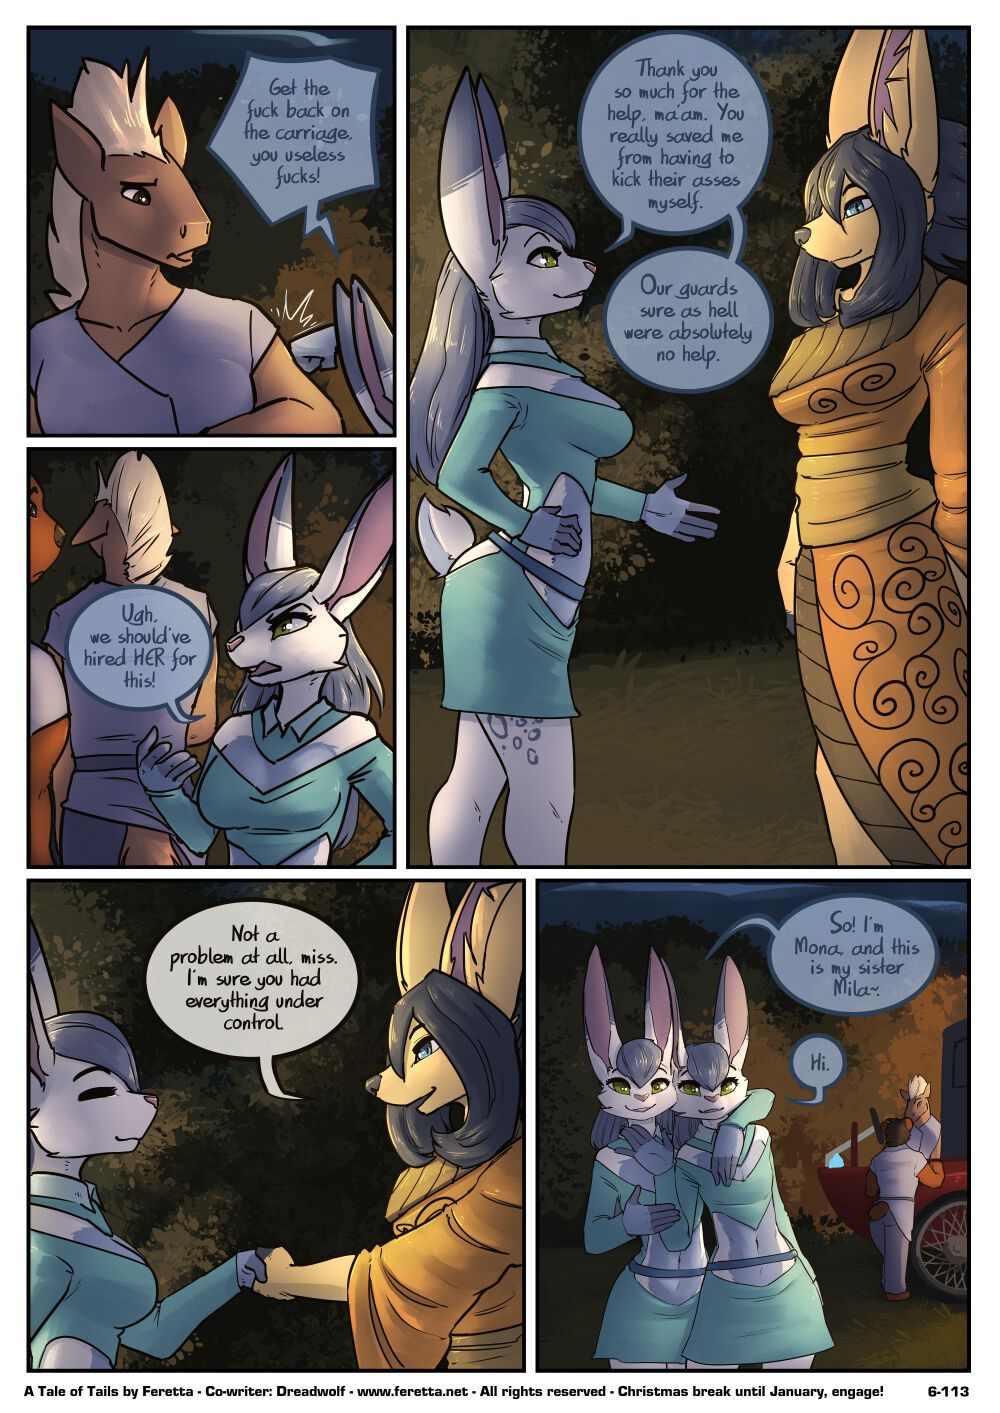 [Feretta] Farellian Legends: A Tale of Tails (w/Extras) [Ongoing] 408